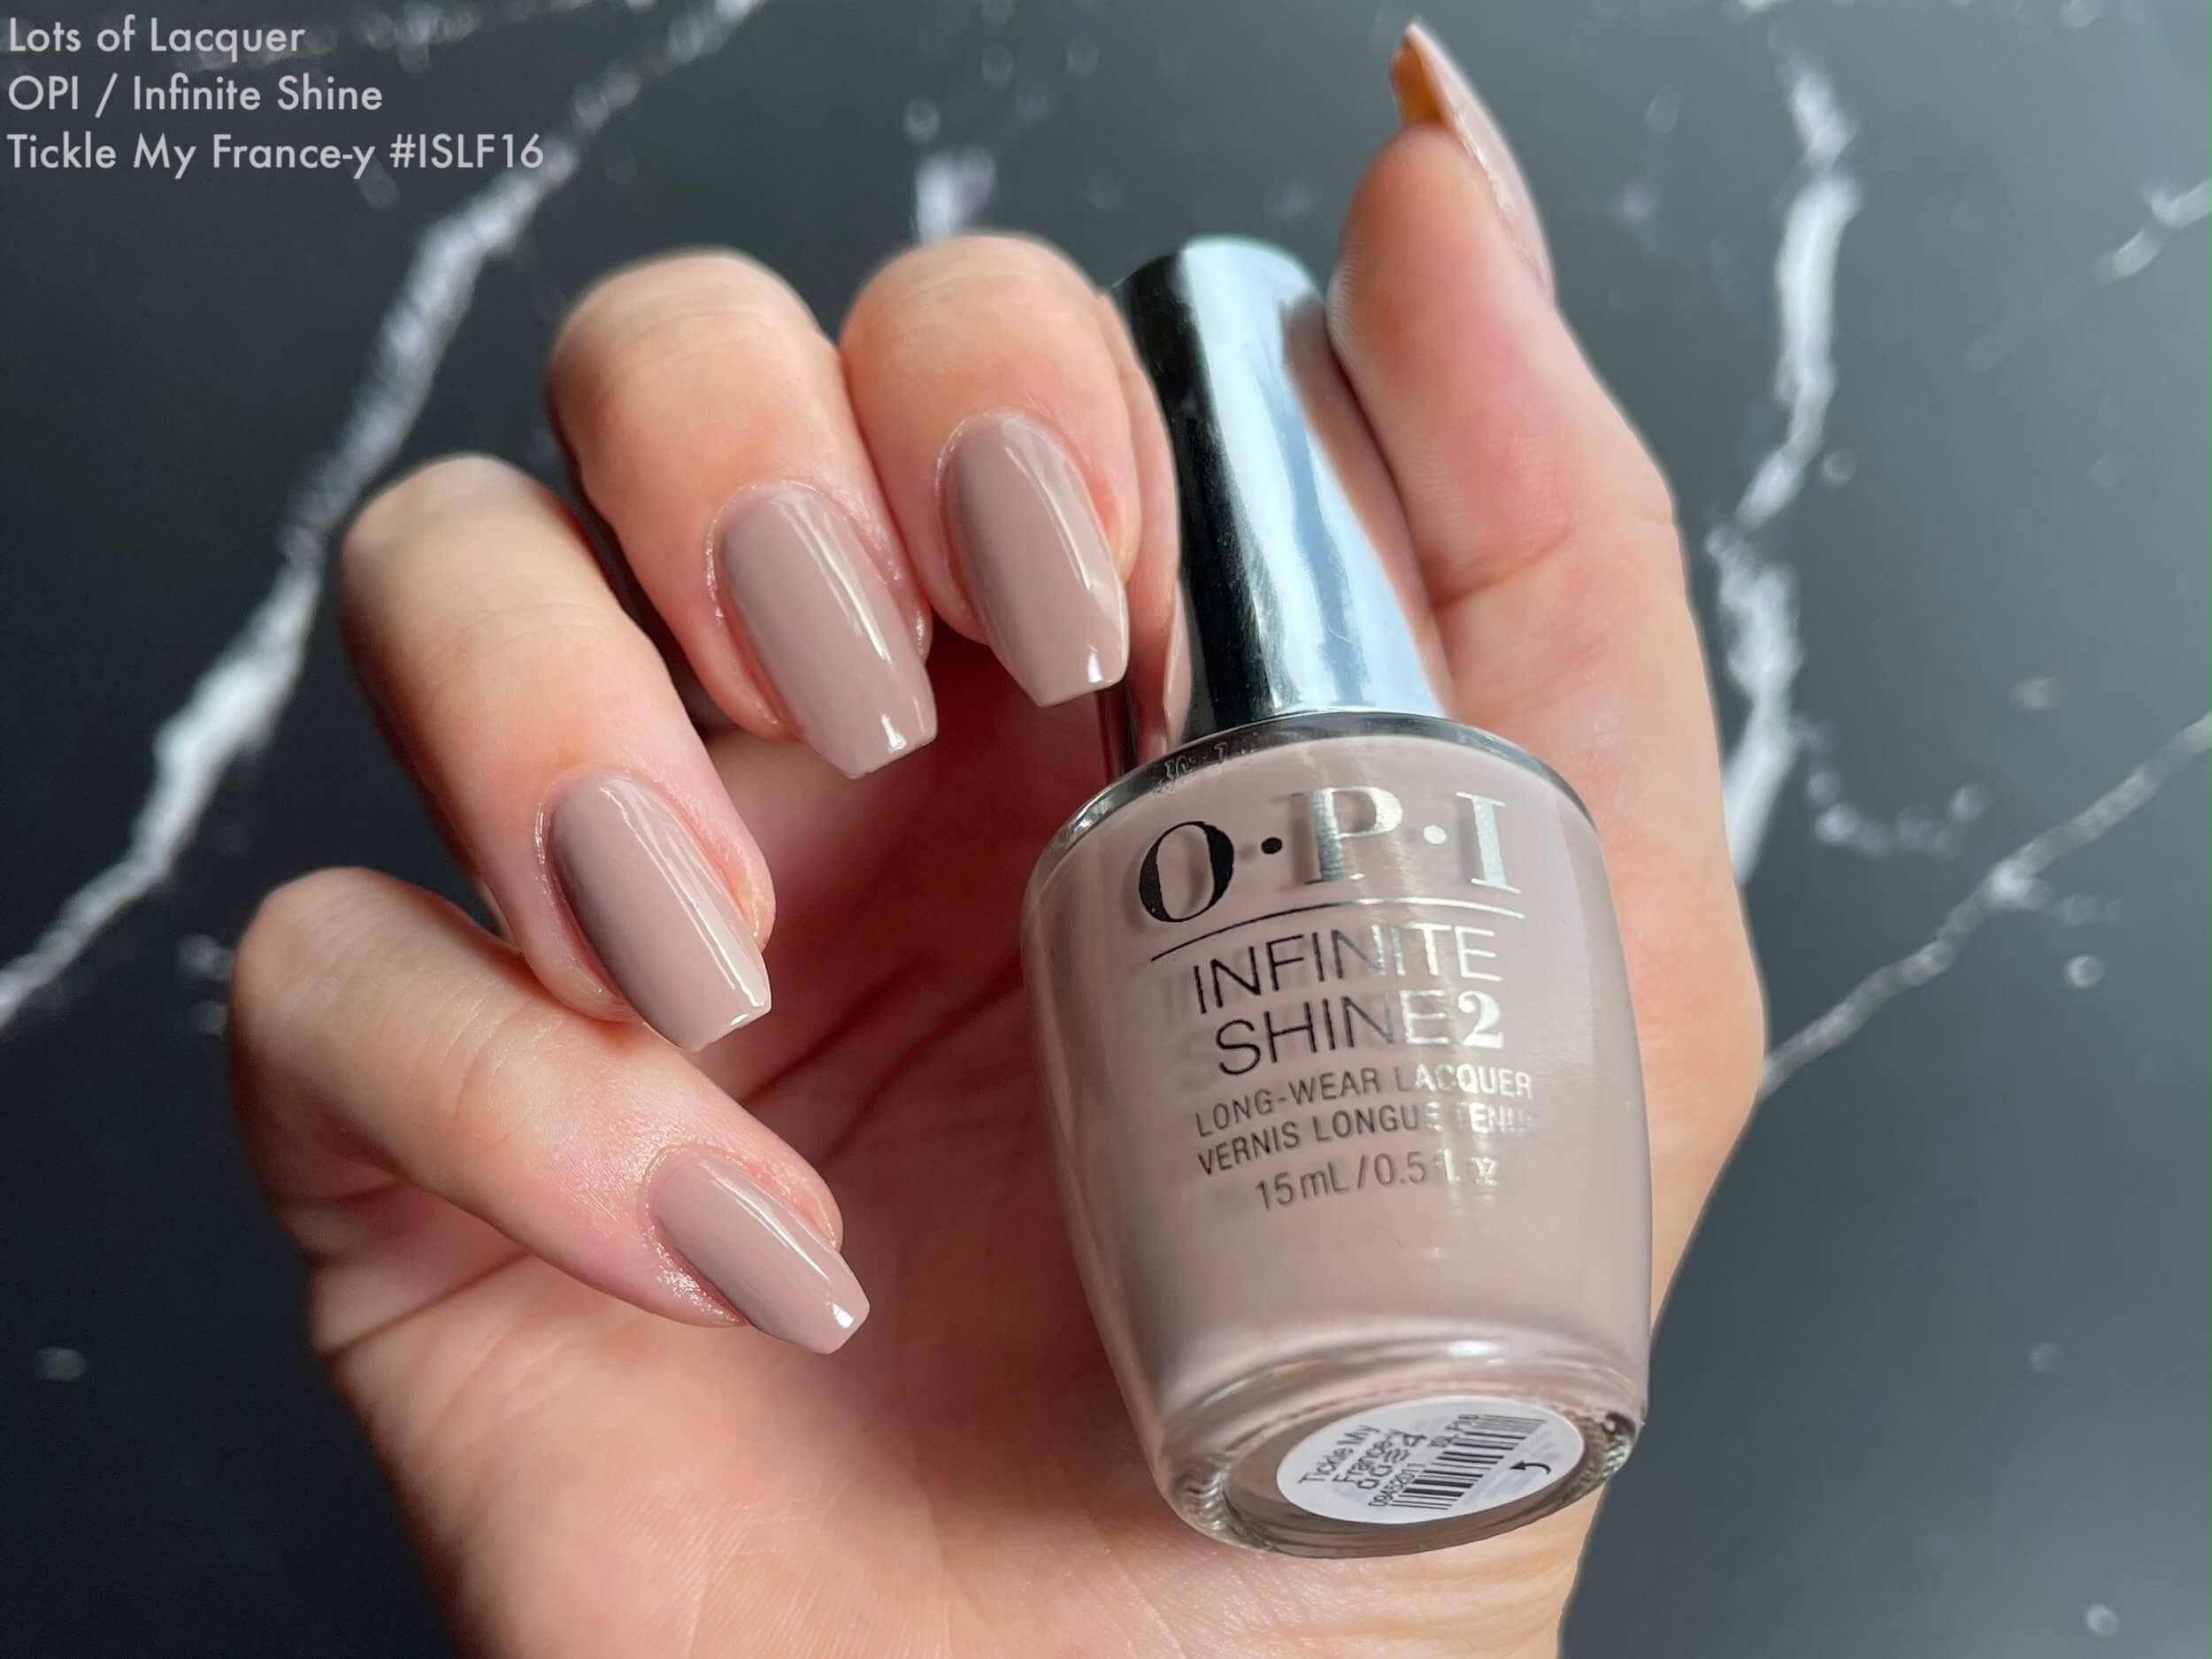 8. OPI GelColor in "Tickle My France-y" - wide 7